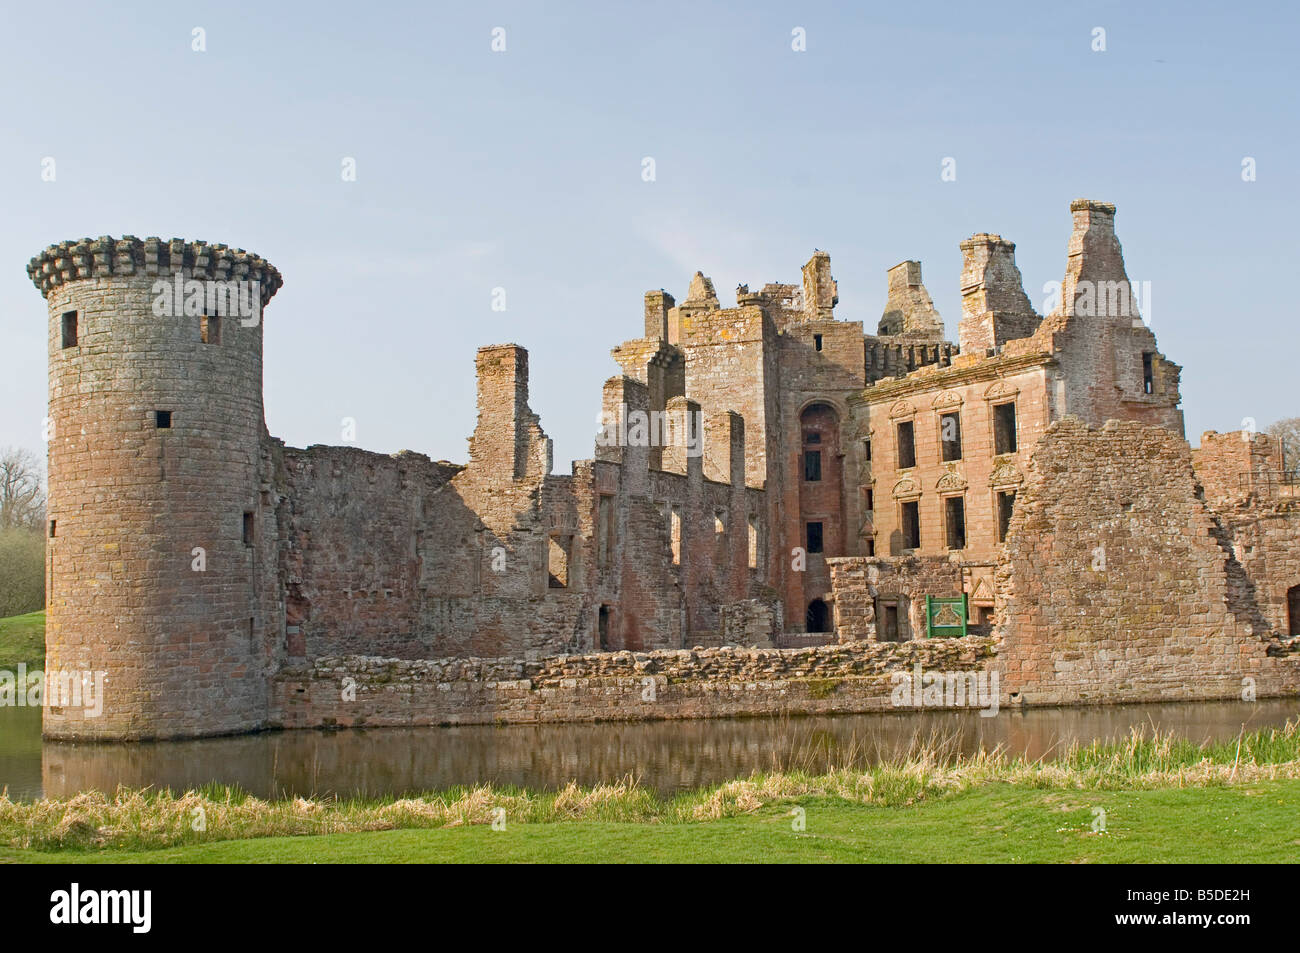 Moated medieval stronghold of Caerlaverock Castle, Dumfries and Galloway, Scotland, Europe Stock Photo